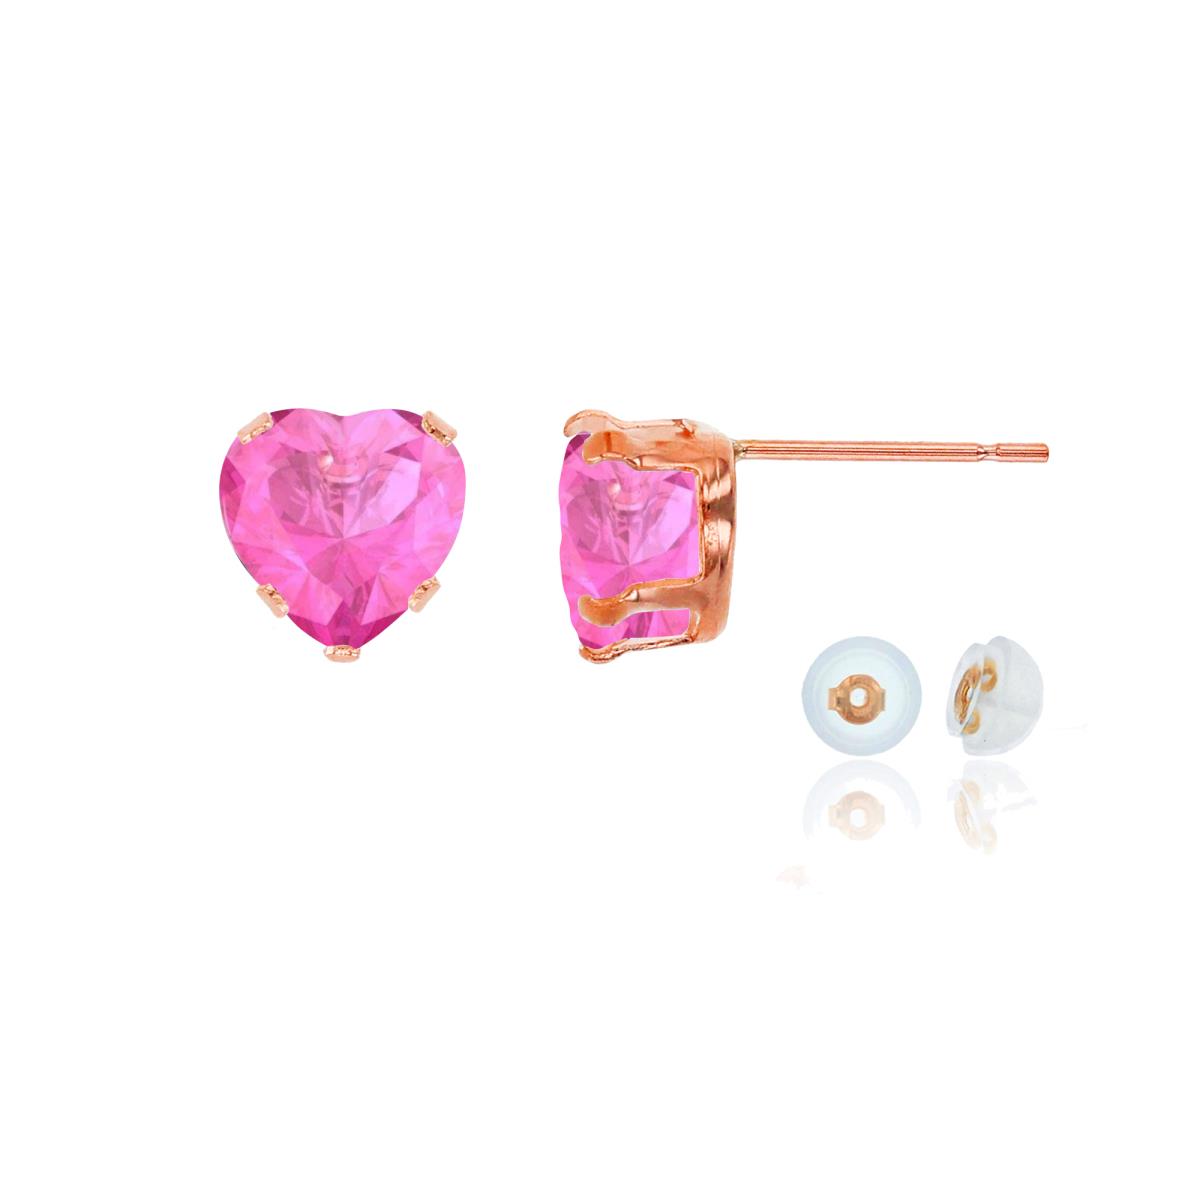 10K Rose Gold 5x5mm Heart Cr Pink Sapphire Stud Earring with Silicone Back